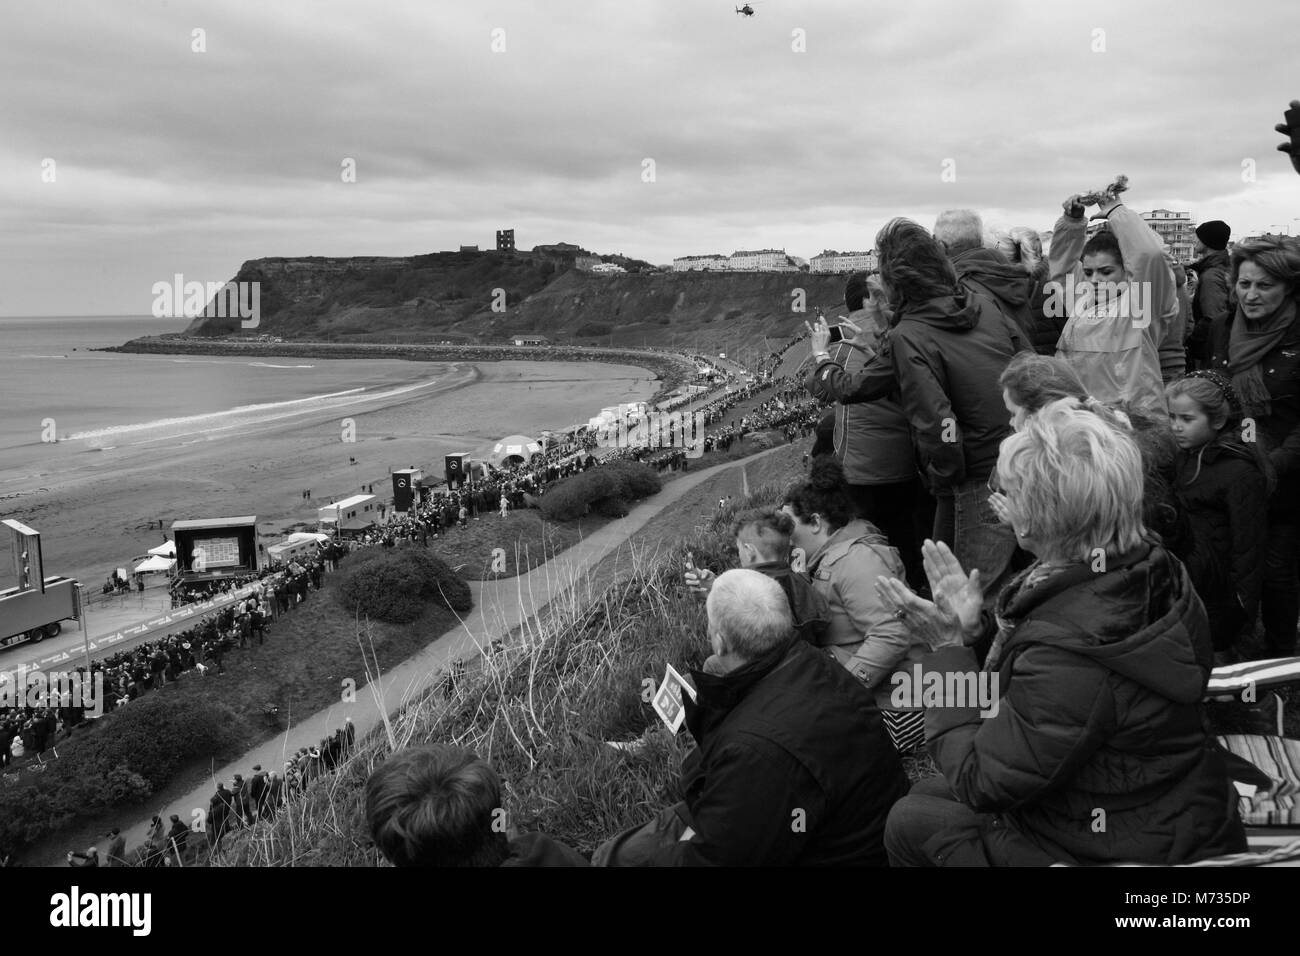 Tour de Yorkshire 2016 Crowds cheer to watch Thomas Voeckler take the stage win and over GC from Luke Rowe during the final of the Tour de Yorkshire. Scarborough North Bay. Stock Photo